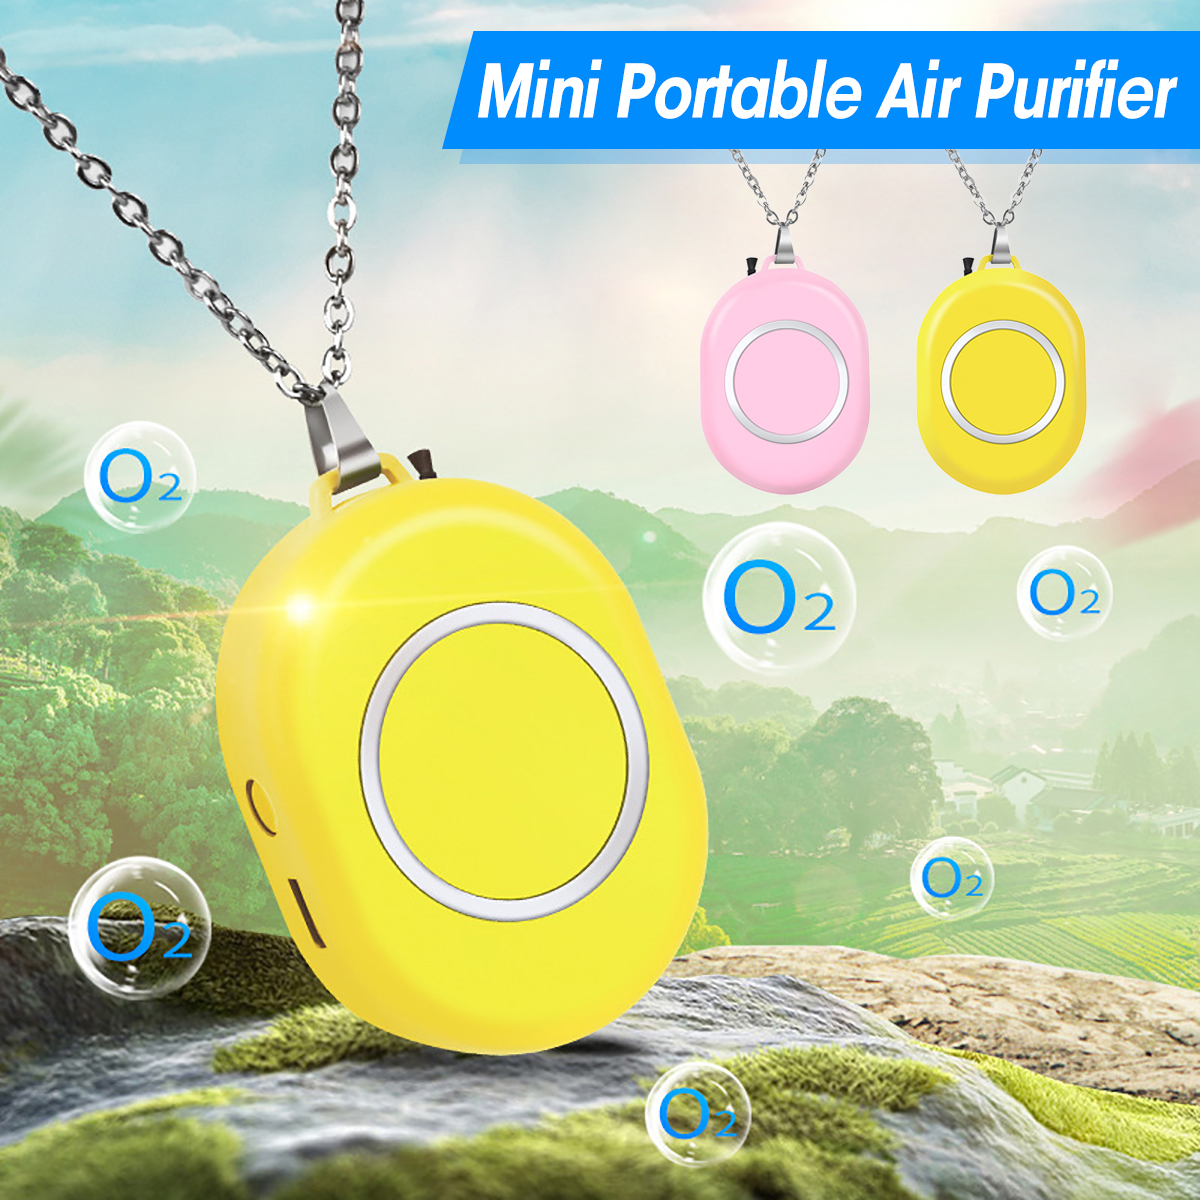 Mini-Portable-Air-Purifier-Negative-Ions-Neck-Hanging-Necklace-Personal-Air-Cleaner-1707470-3